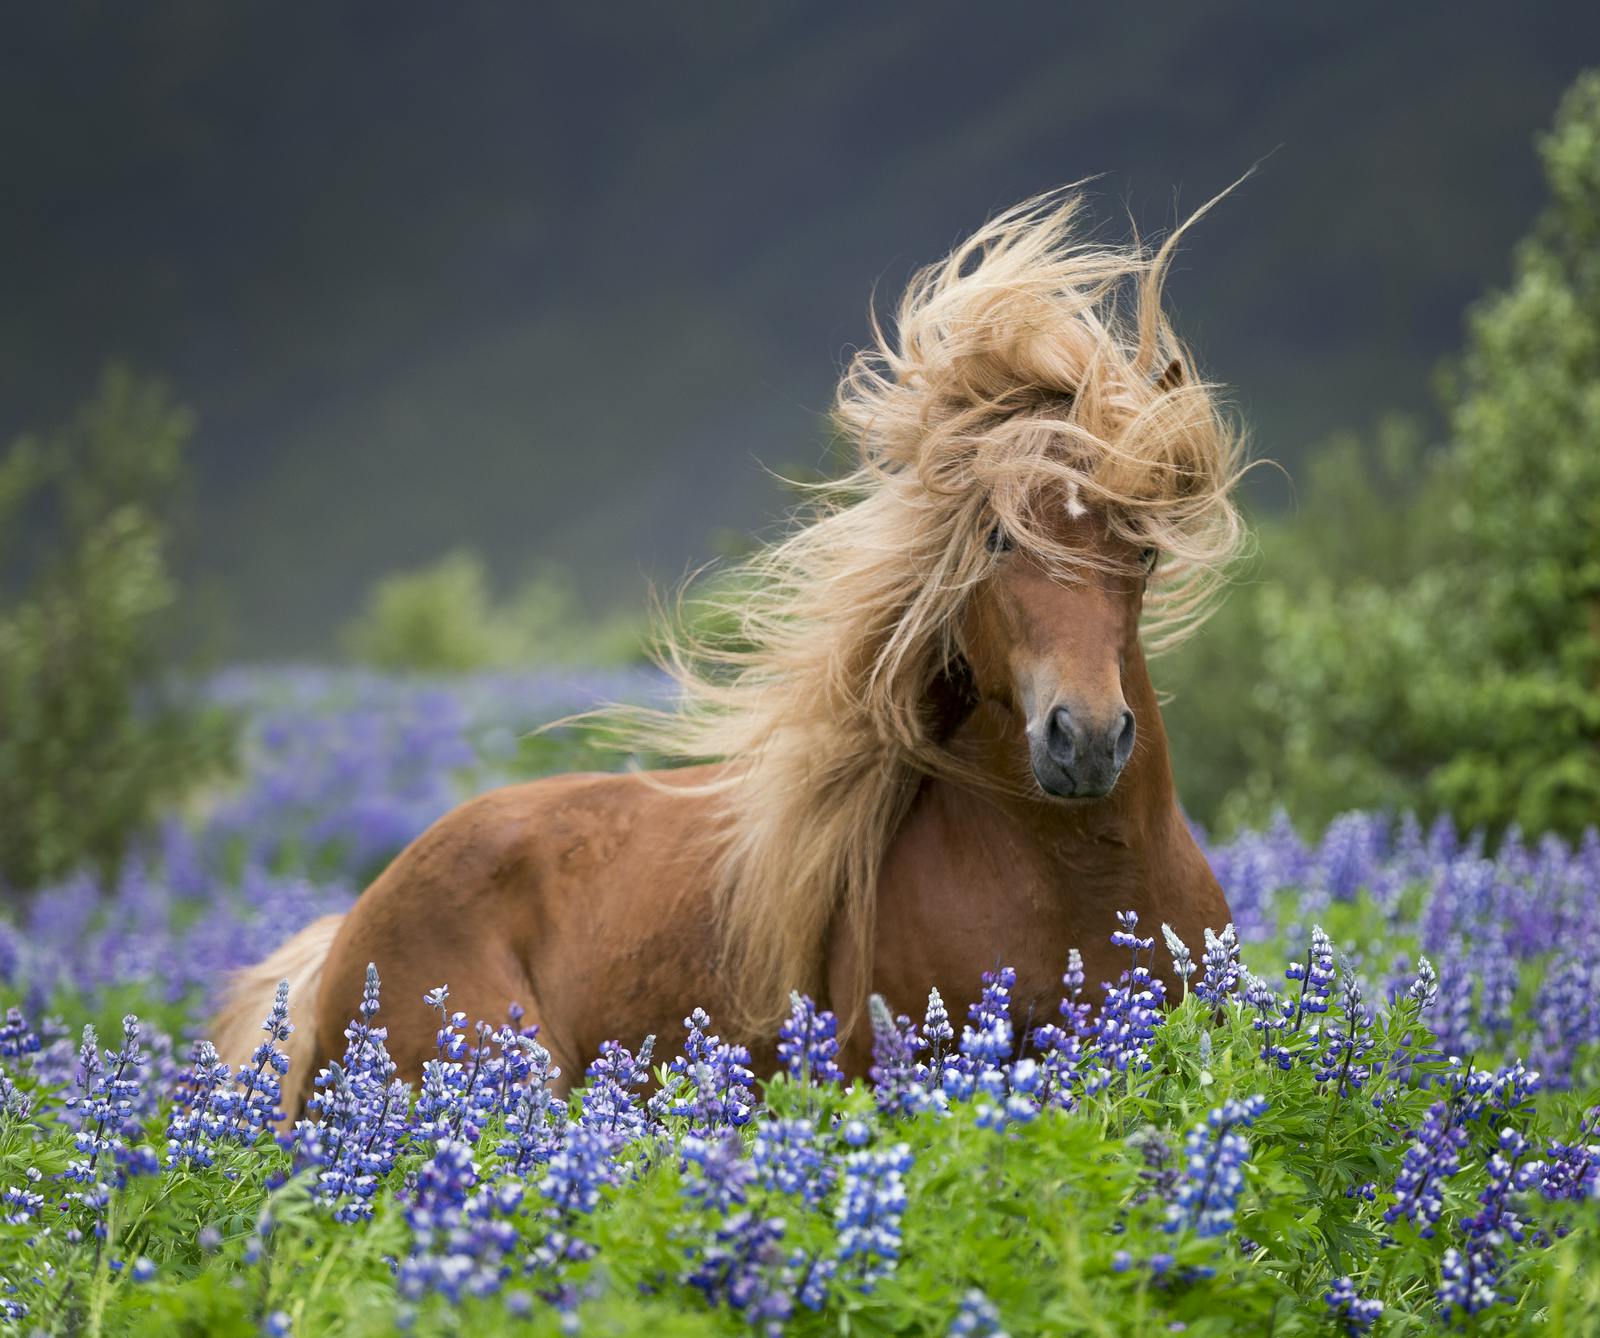 Horse laying in lupine field. Photo: Ragnar Th. Sigurðsson